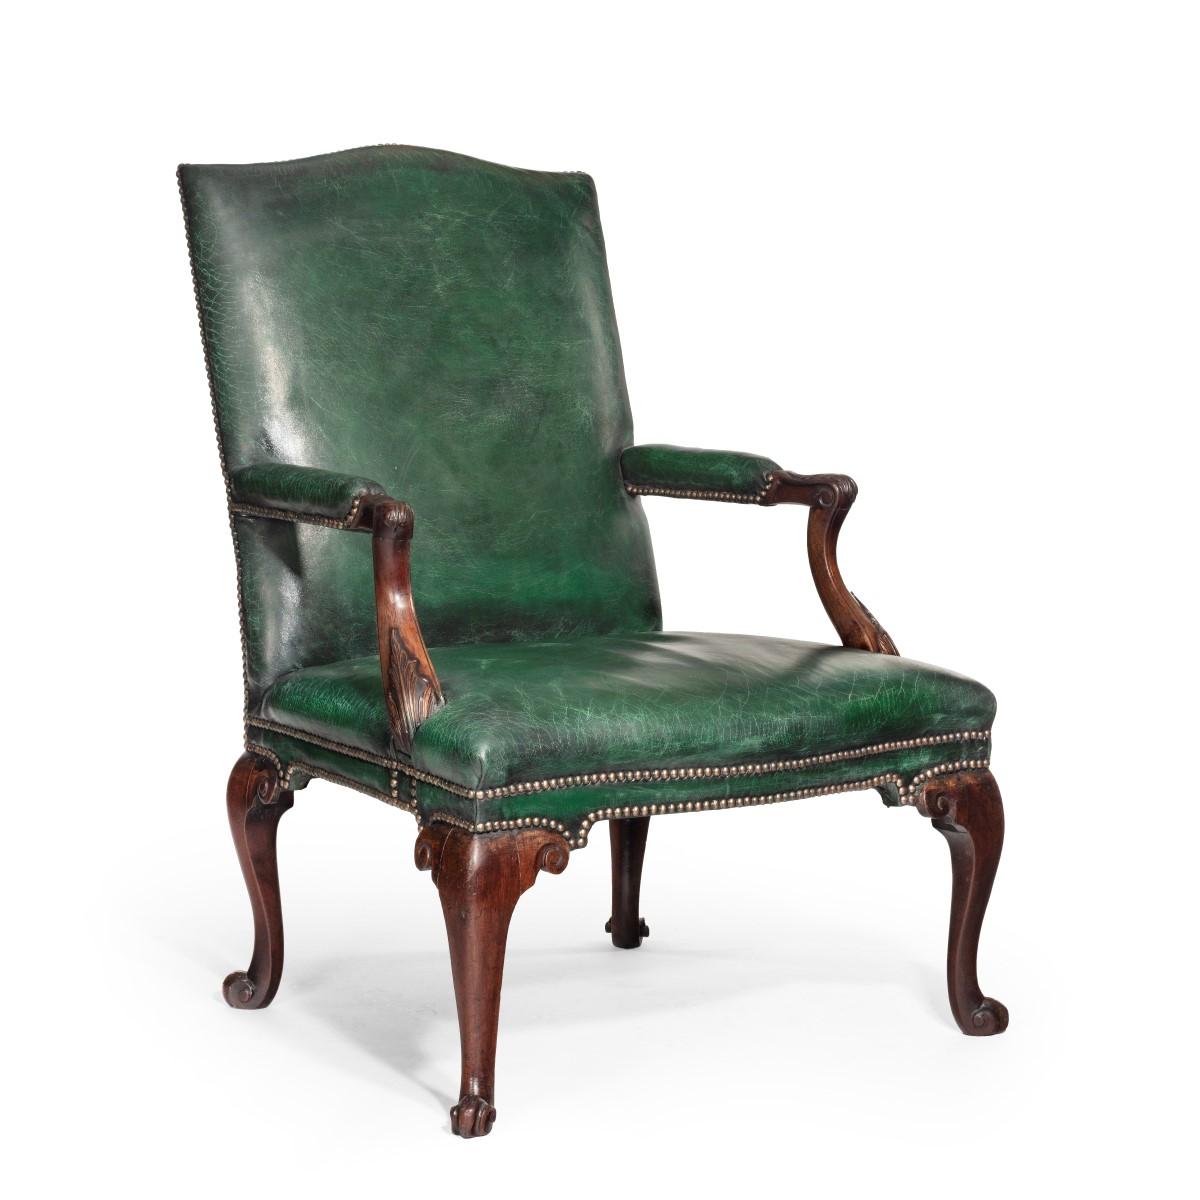 A George III Chippendale period mahogany wing armchair, the shaped back with scrolling arms, the seat rail with pointed knees, all raised on cabriole legs to front and back terminating in a scroll foot, re-upholstered in distressed green leather.